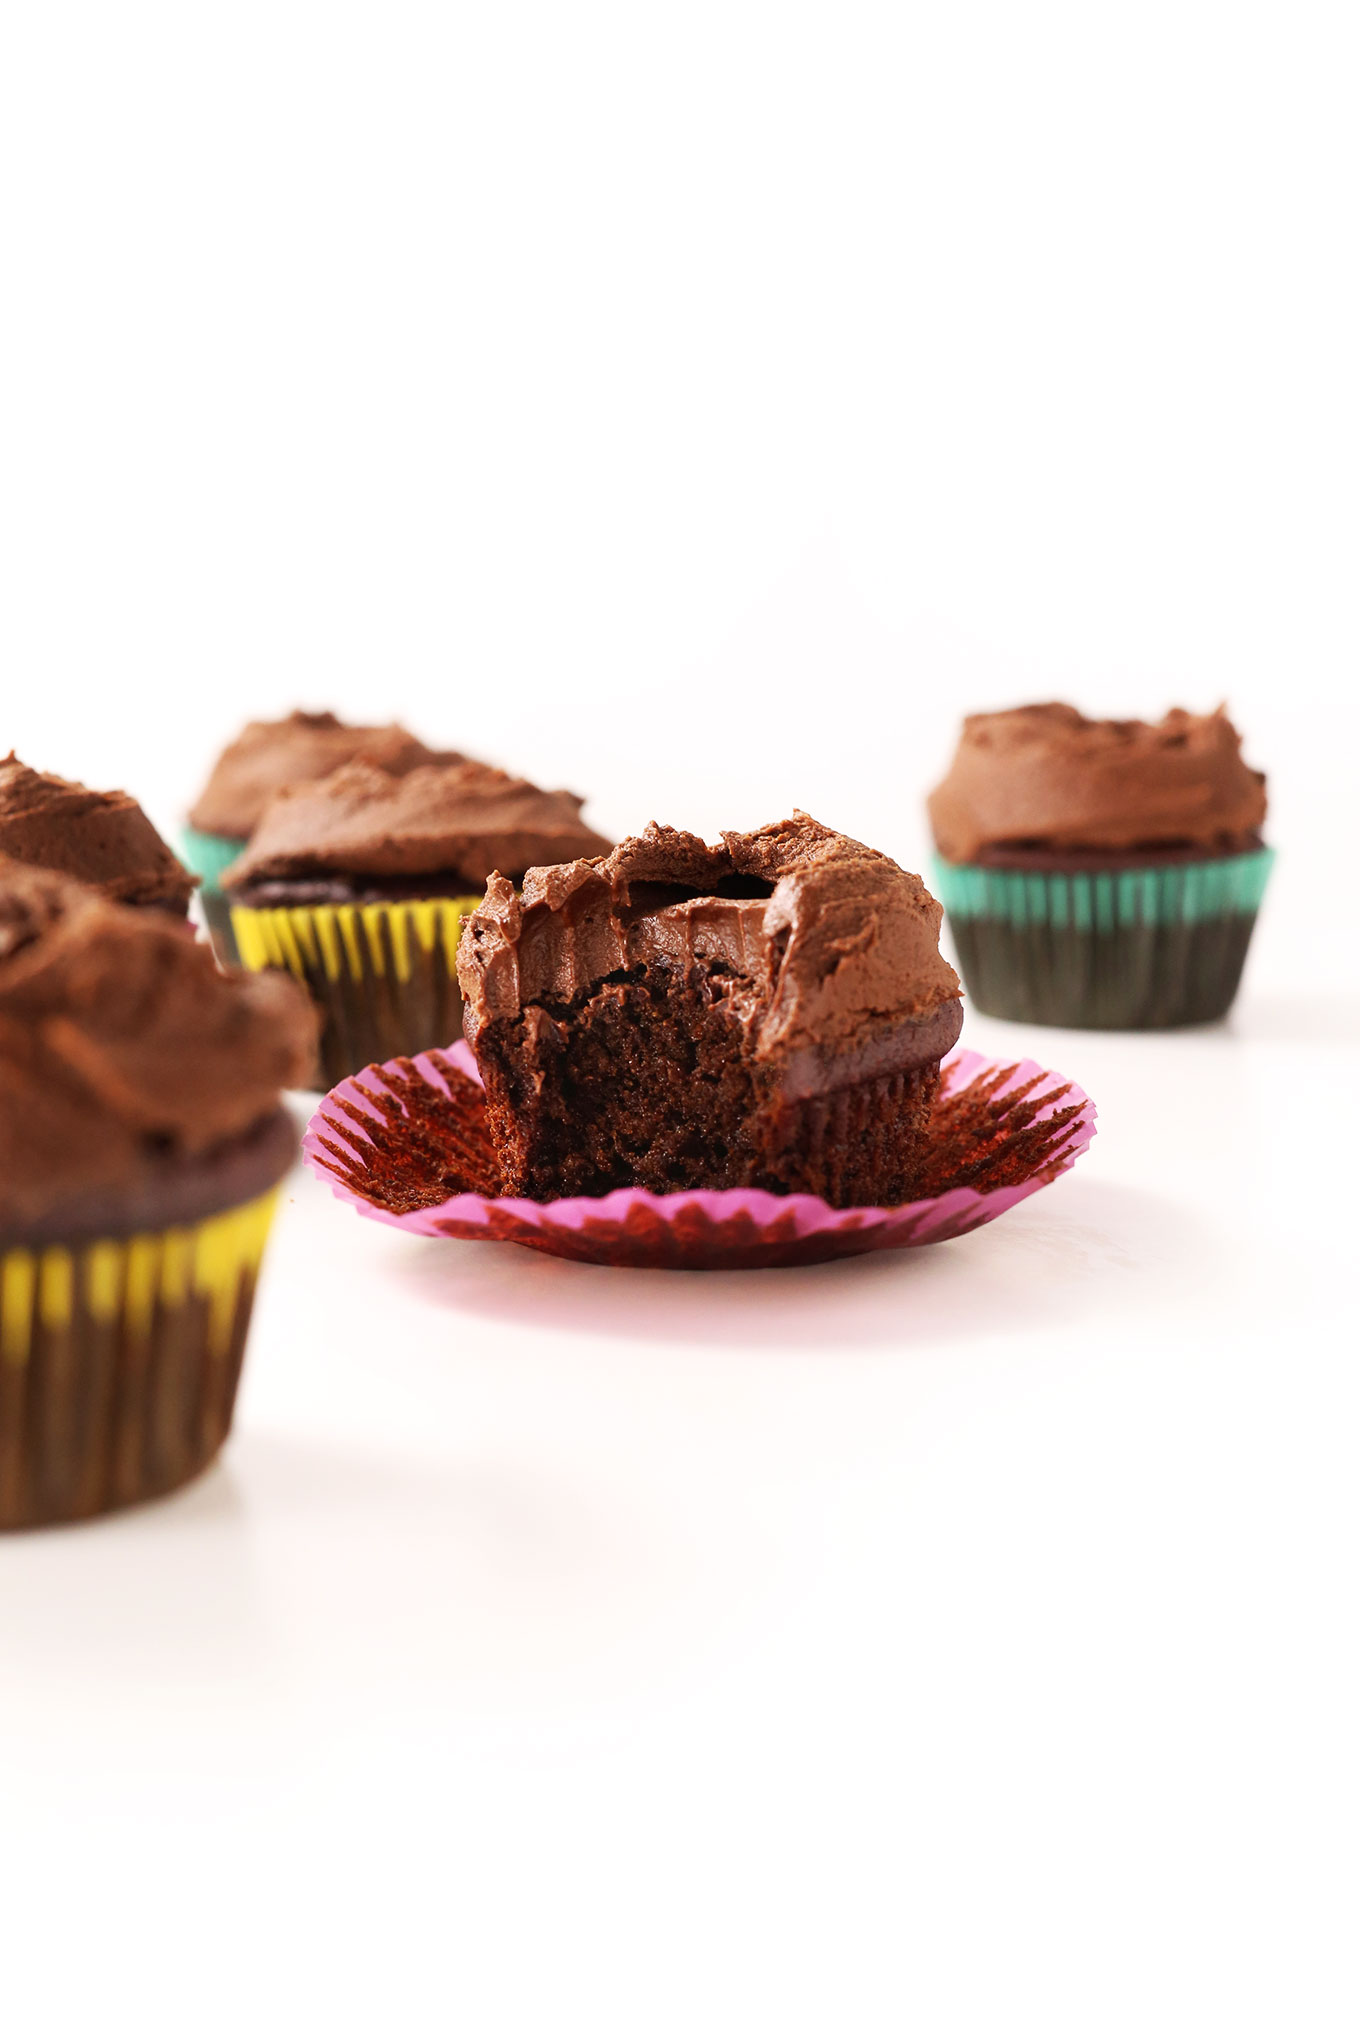 Vegan Gluten-Free Chocolate Cupcakes with yellow, pink, and turquoise wrappers